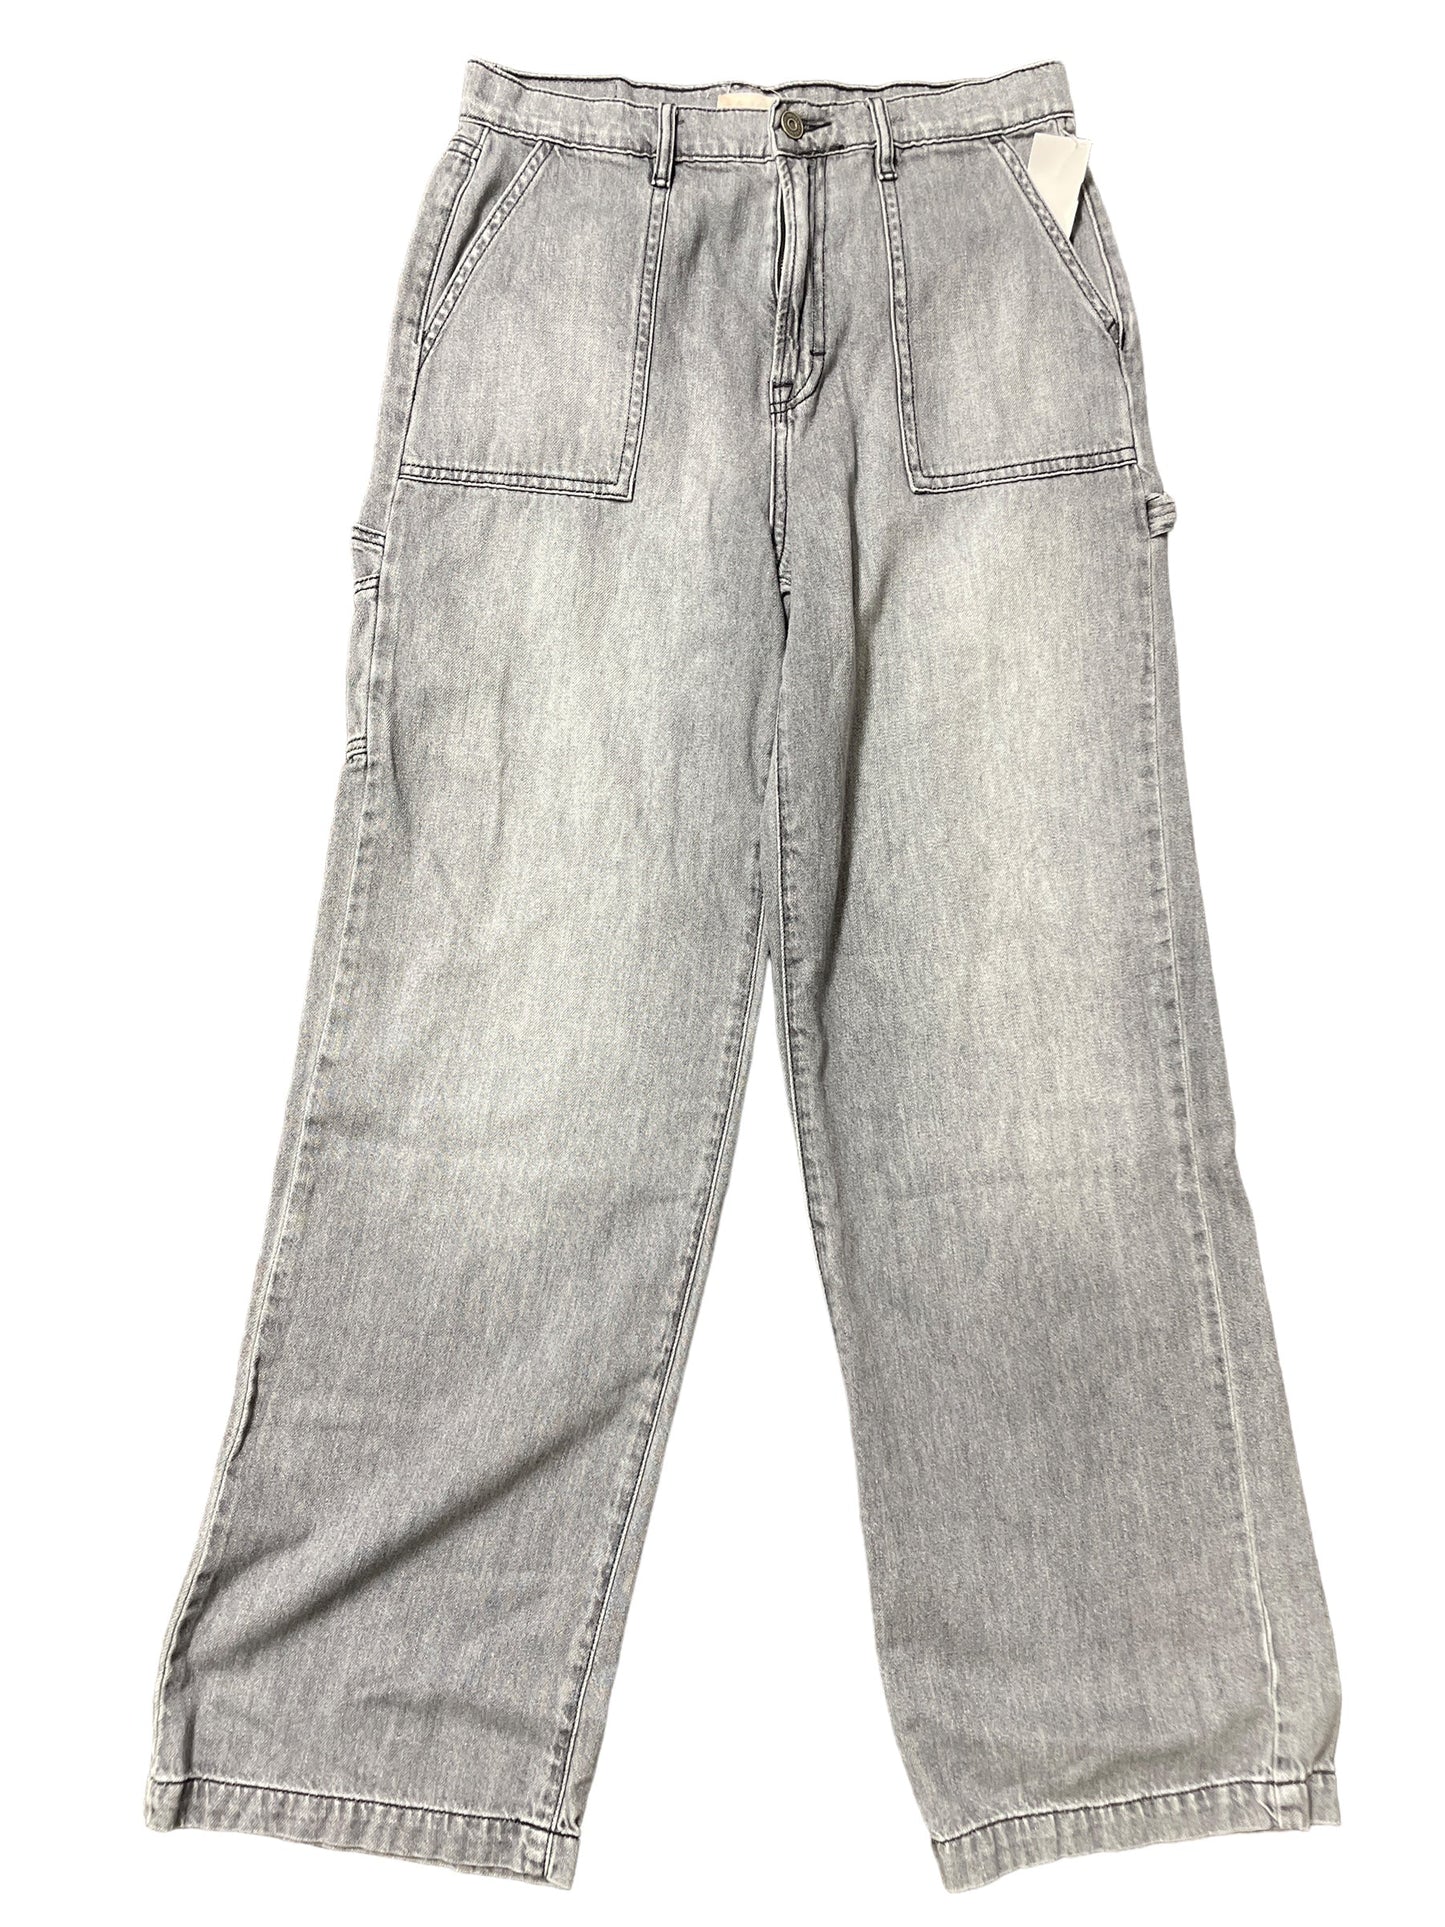 Grey Pants Cargo & Utility Altard State, Size 8